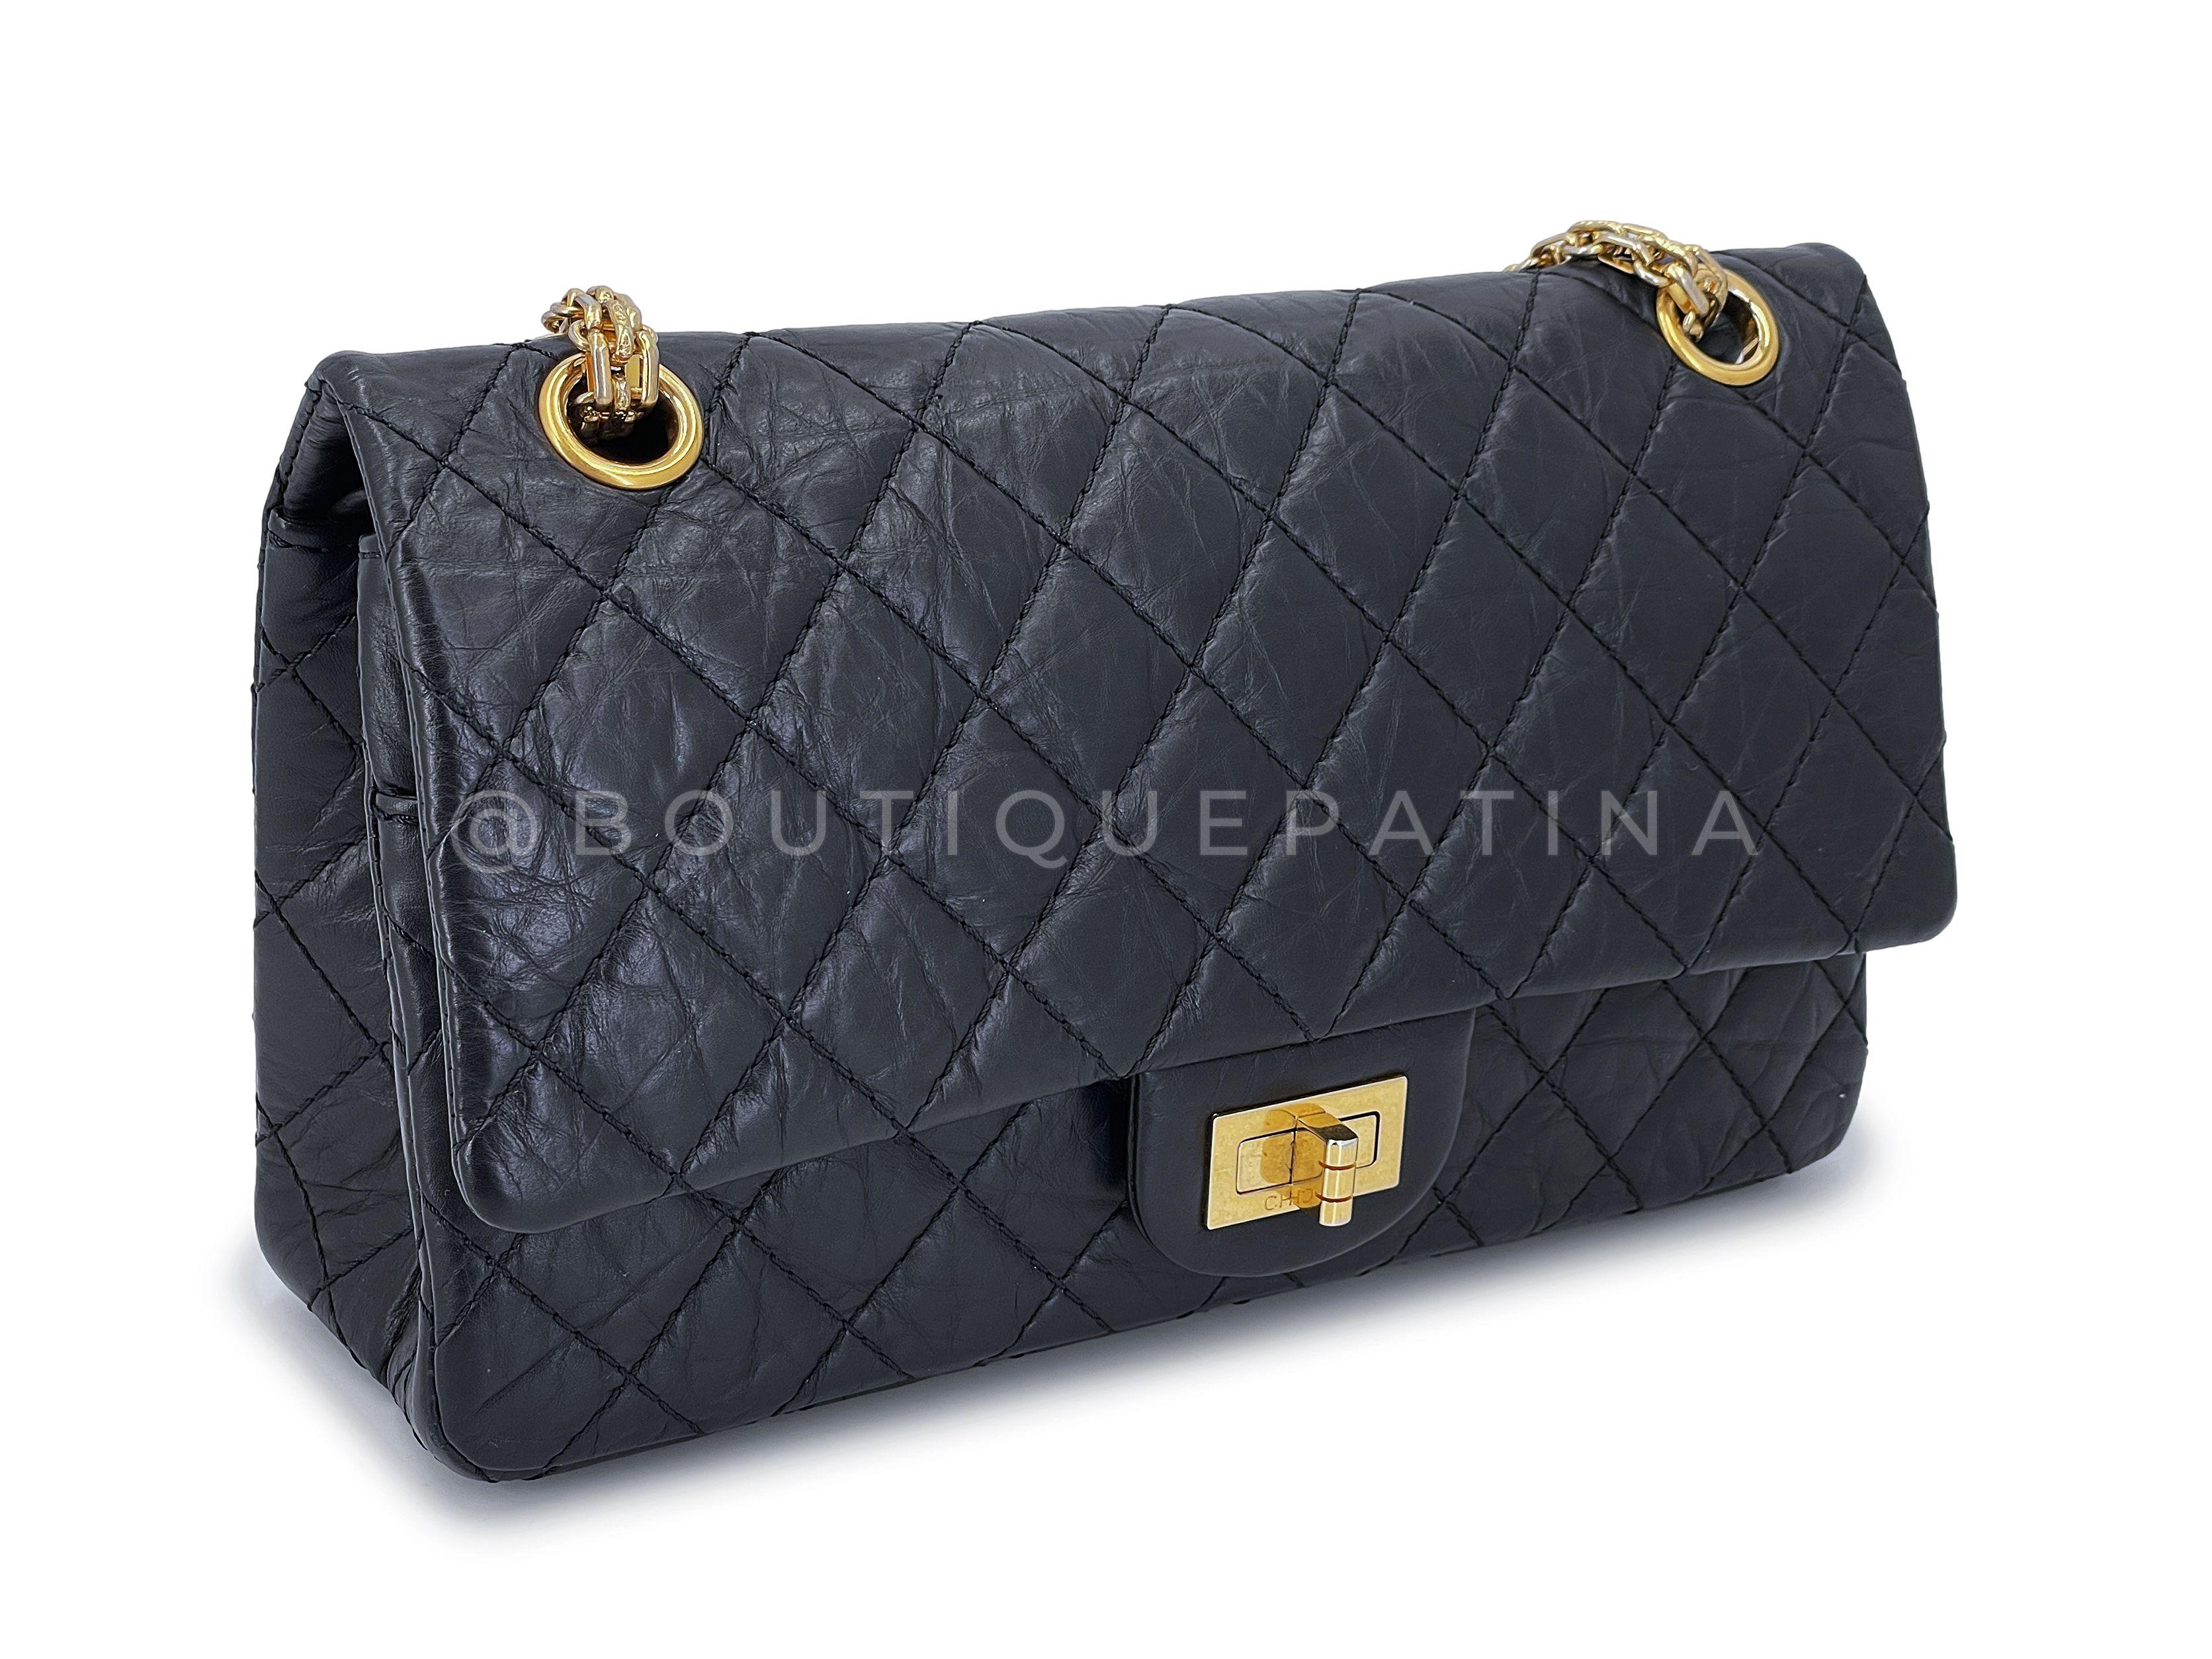 Pristine Chanel Black 225 Reissue Small 2.55 Flap Bag GHW  67274 In Excellent Condition For Sale In Costa Mesa, CA